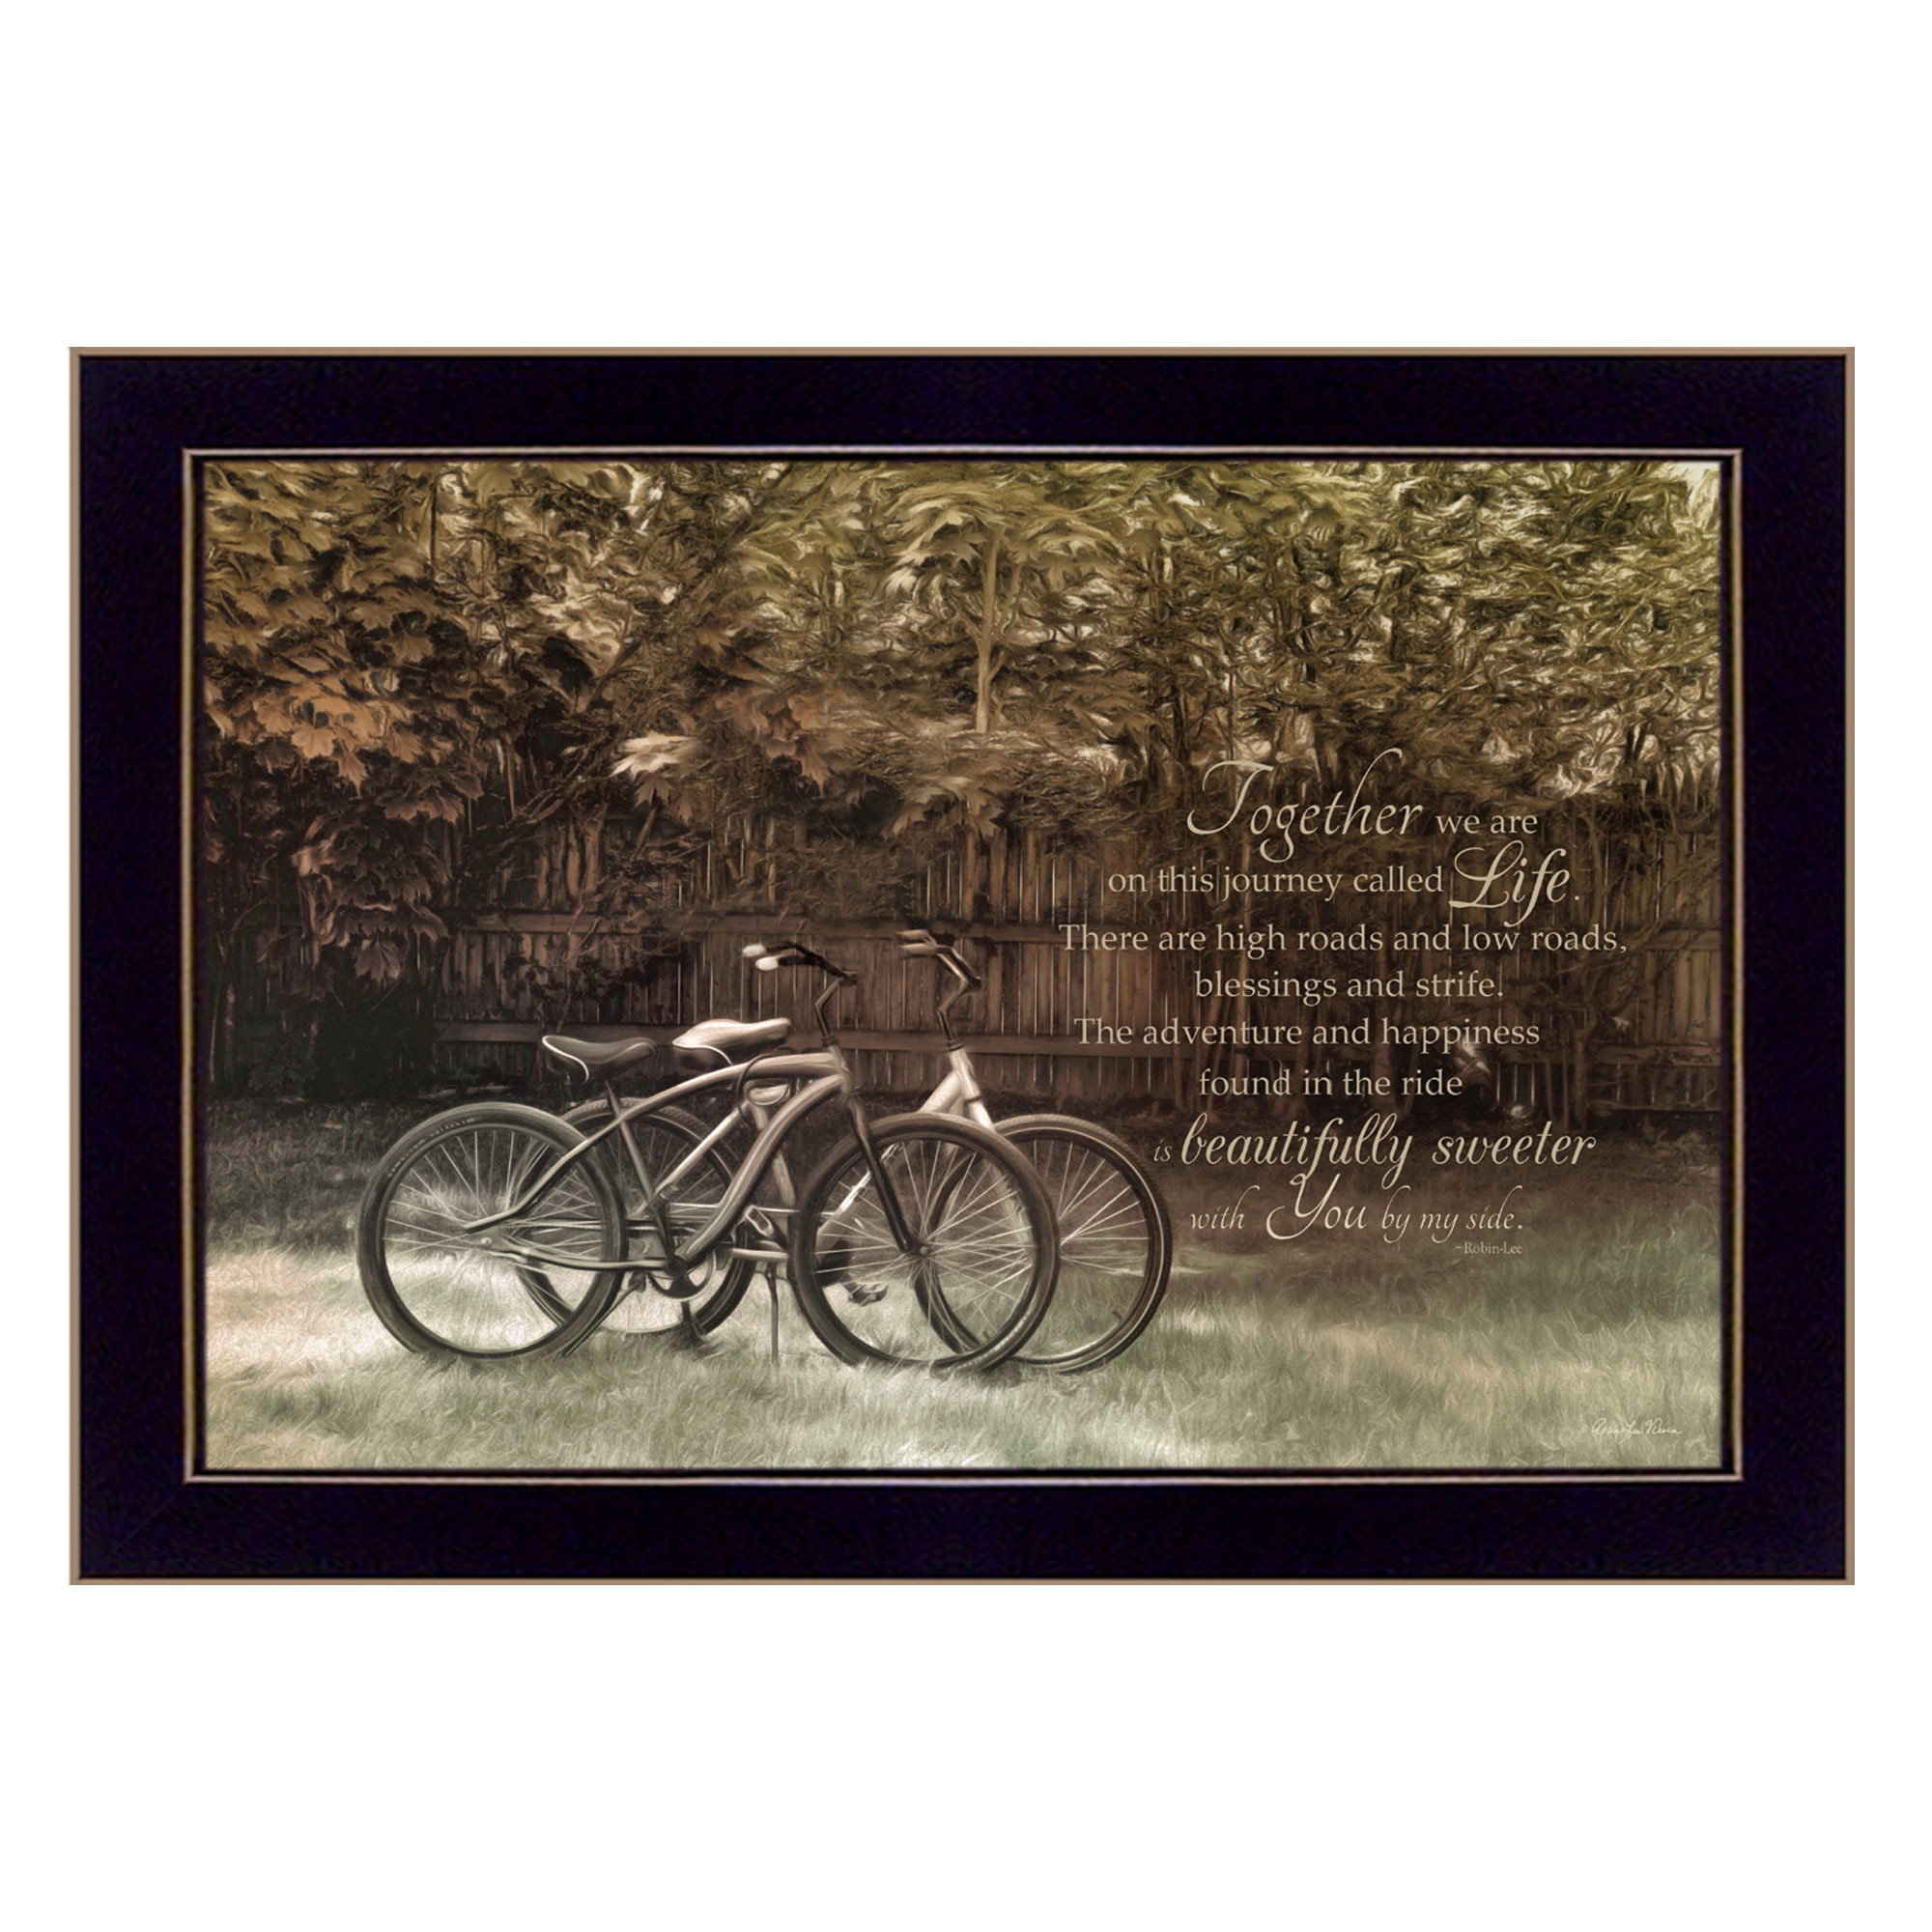 "Journey Together" By Robin-Lee Vieira, Printed Wall Art, Ready To Hang Framed Poster, Black Frame